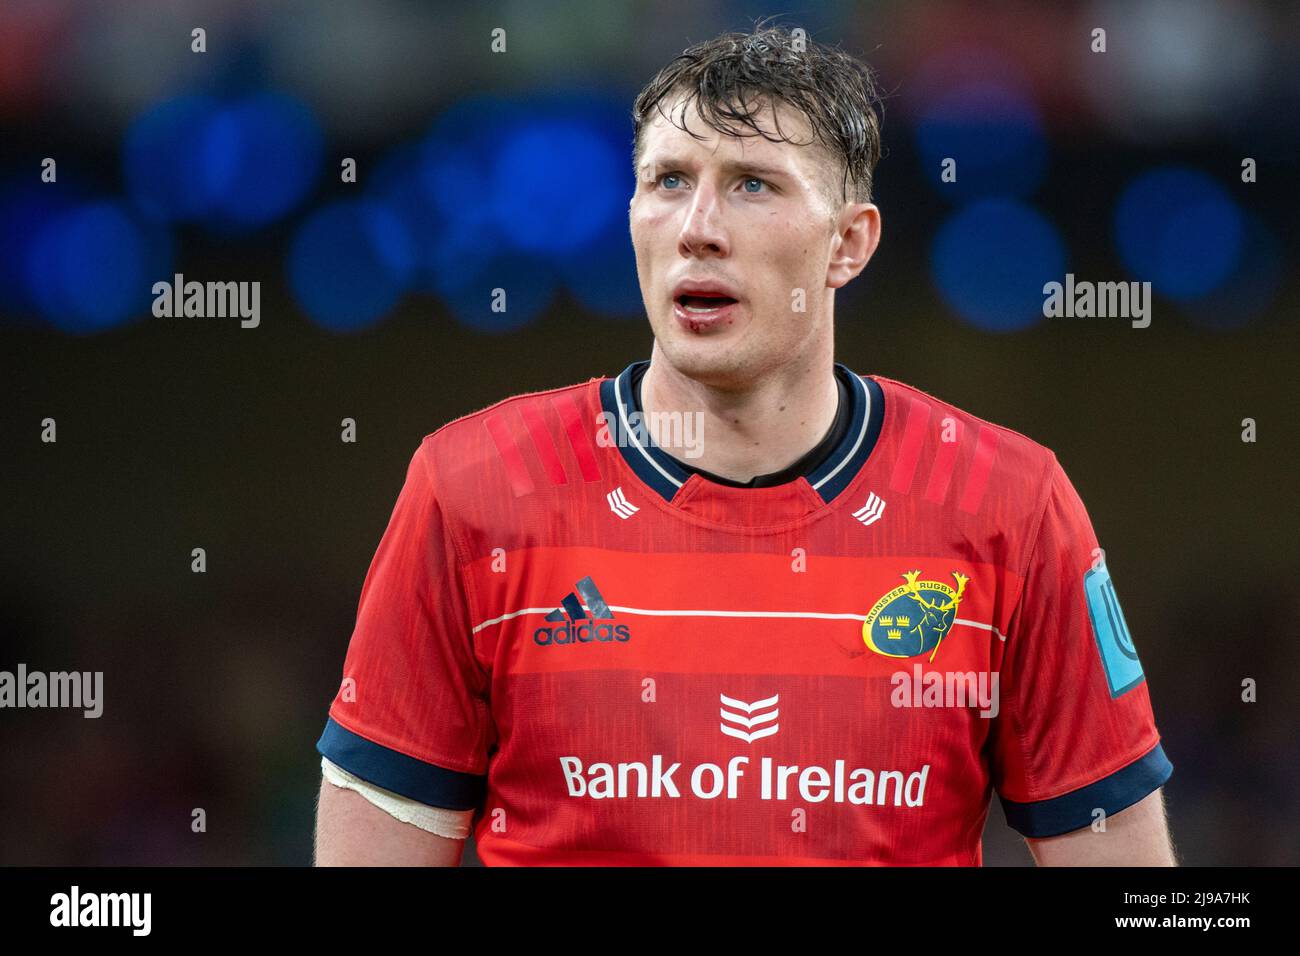 Thomas Ahern of Munster during the United Rugby Championship Round 18 match between Leinster Rugby and